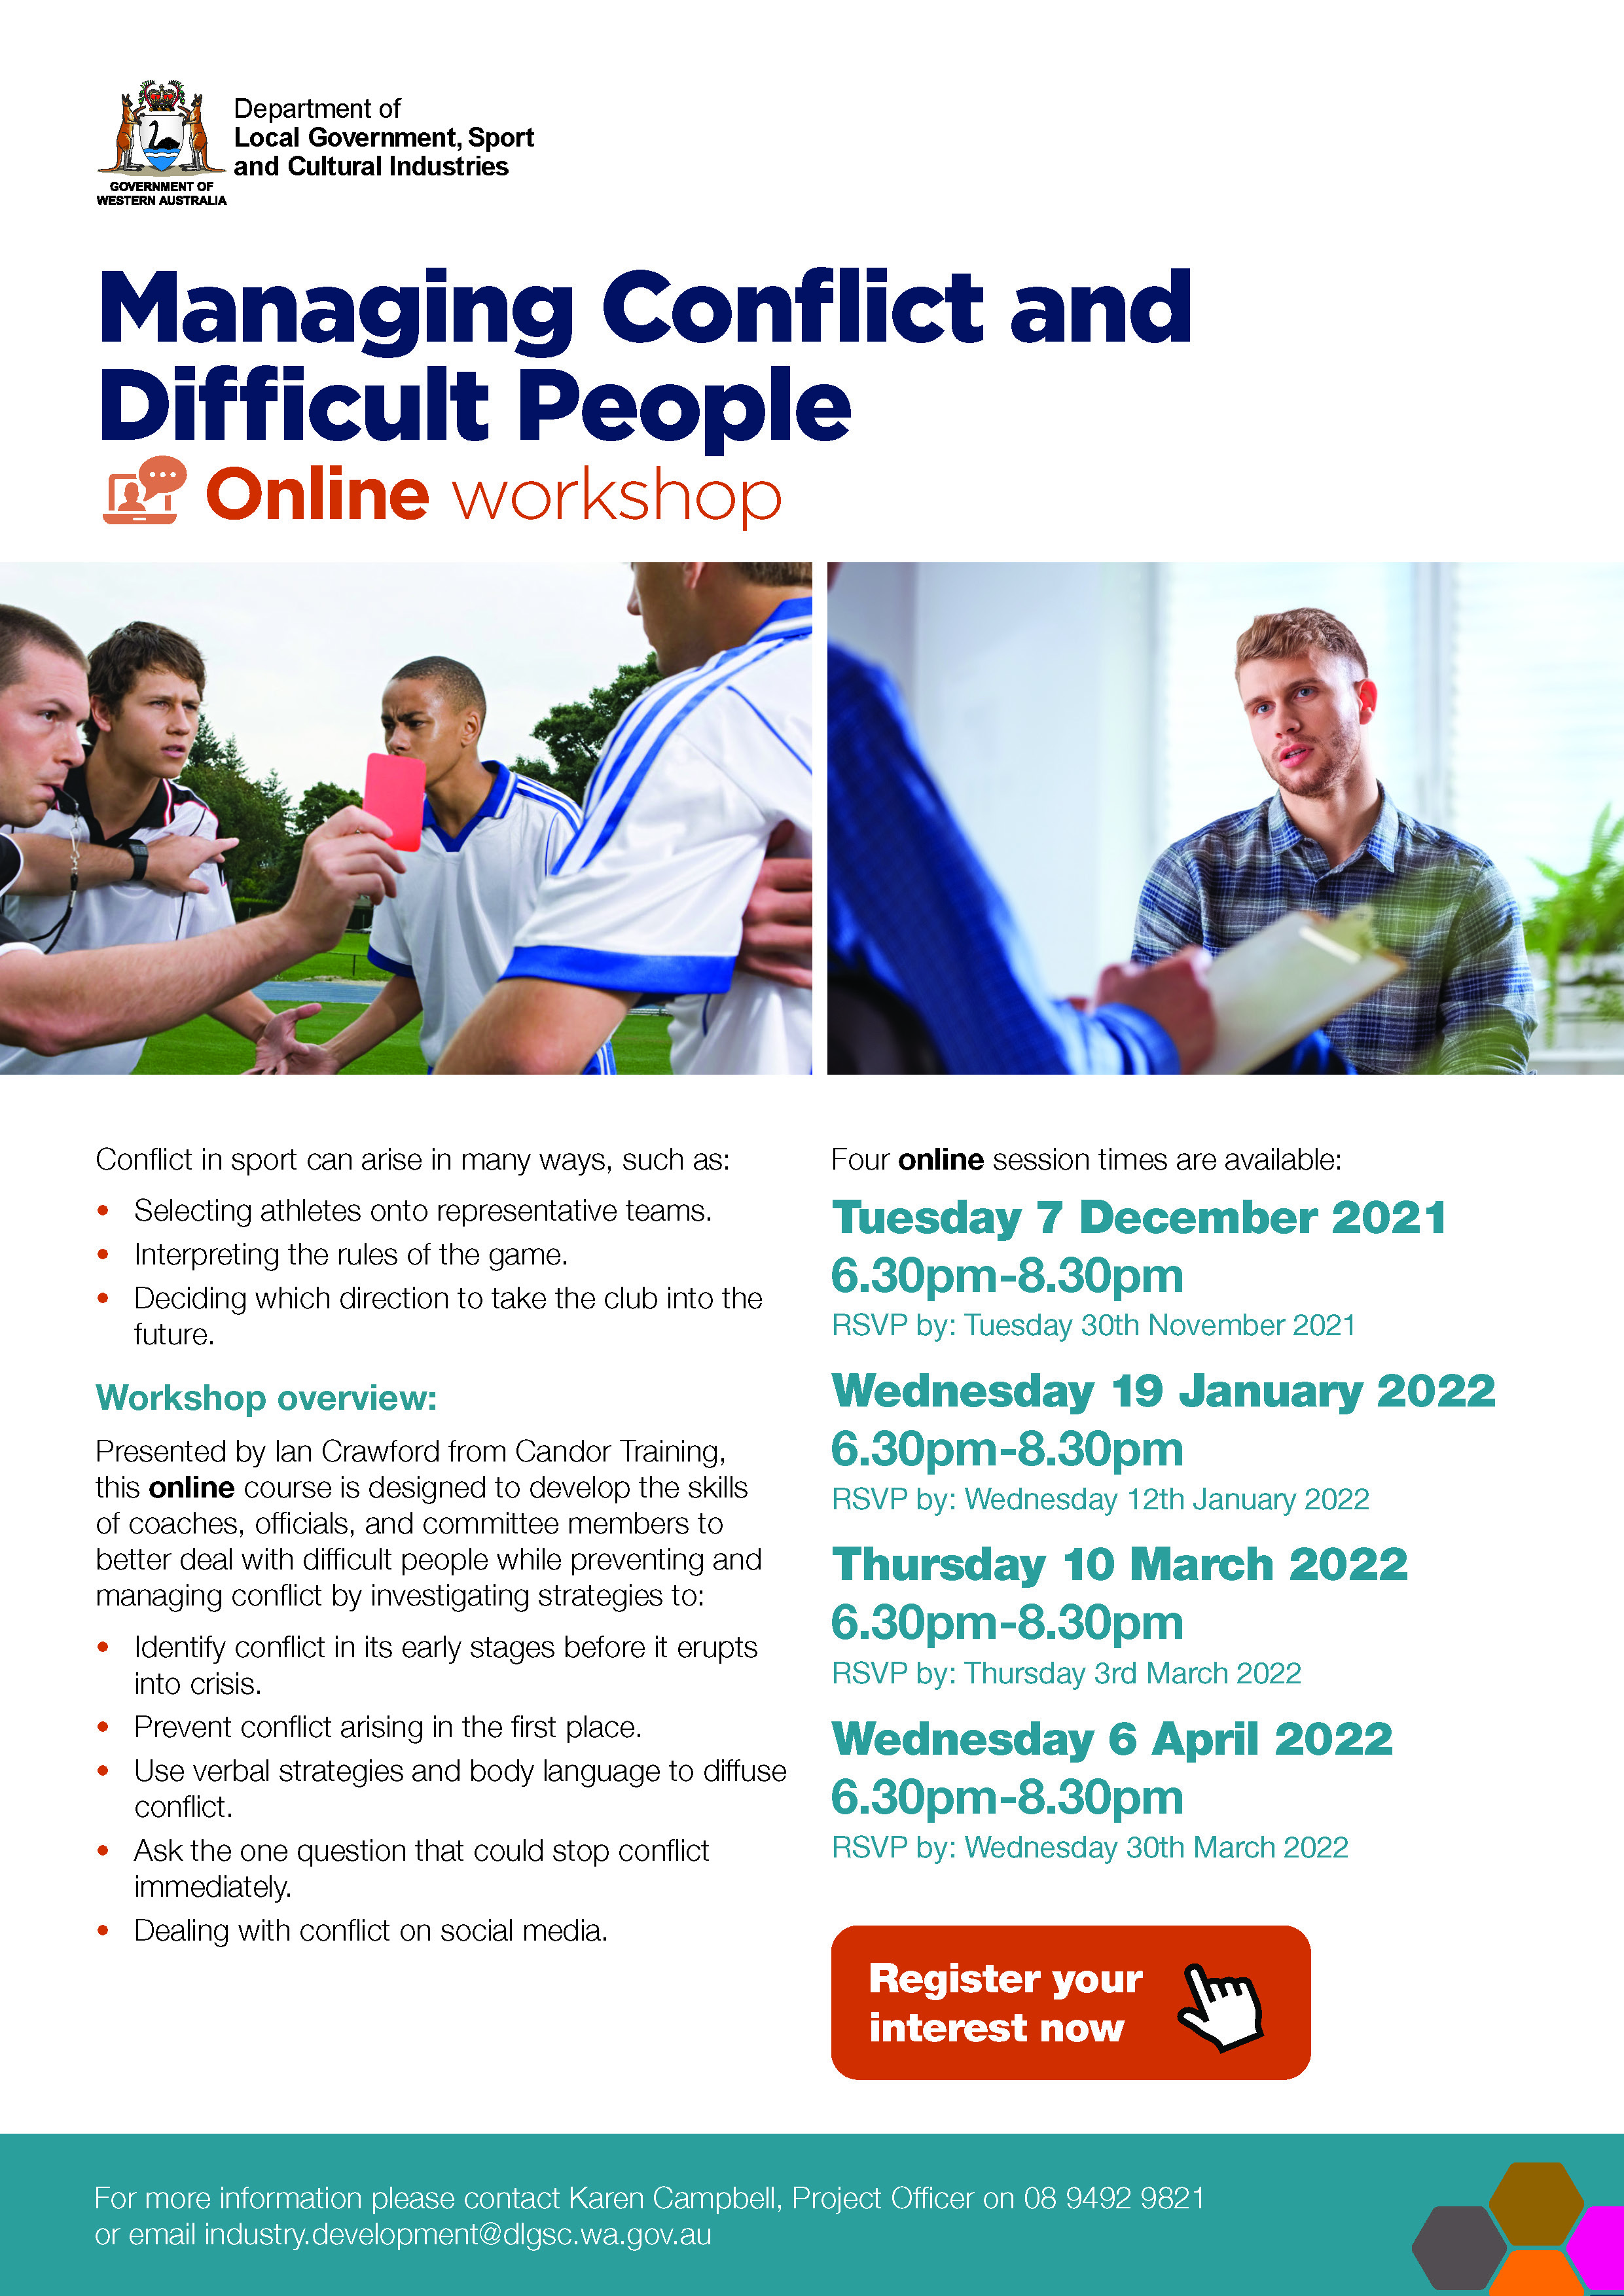 Managing Conflict and Difficult People flyer